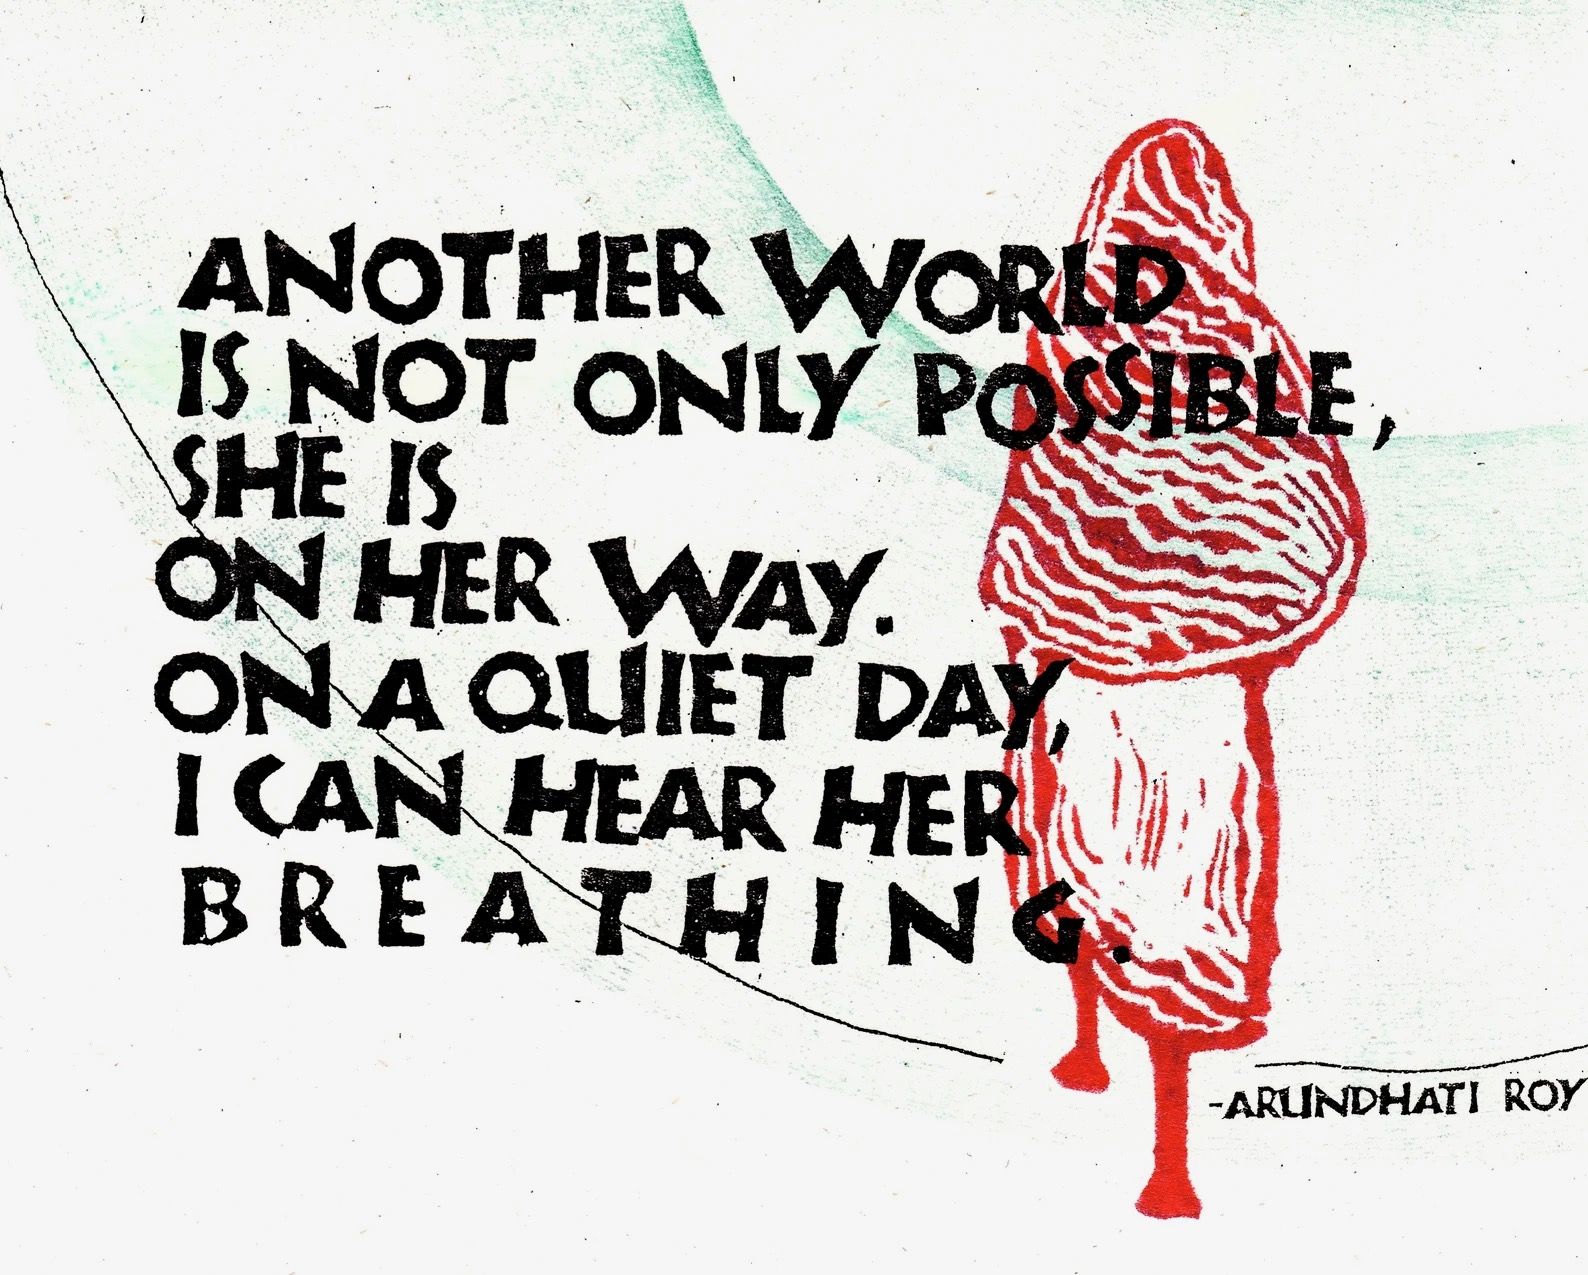 A postcard with a quote from Arundhati Roy printed in large block letters, next to a an illustration of woman wrapped in a shawl.